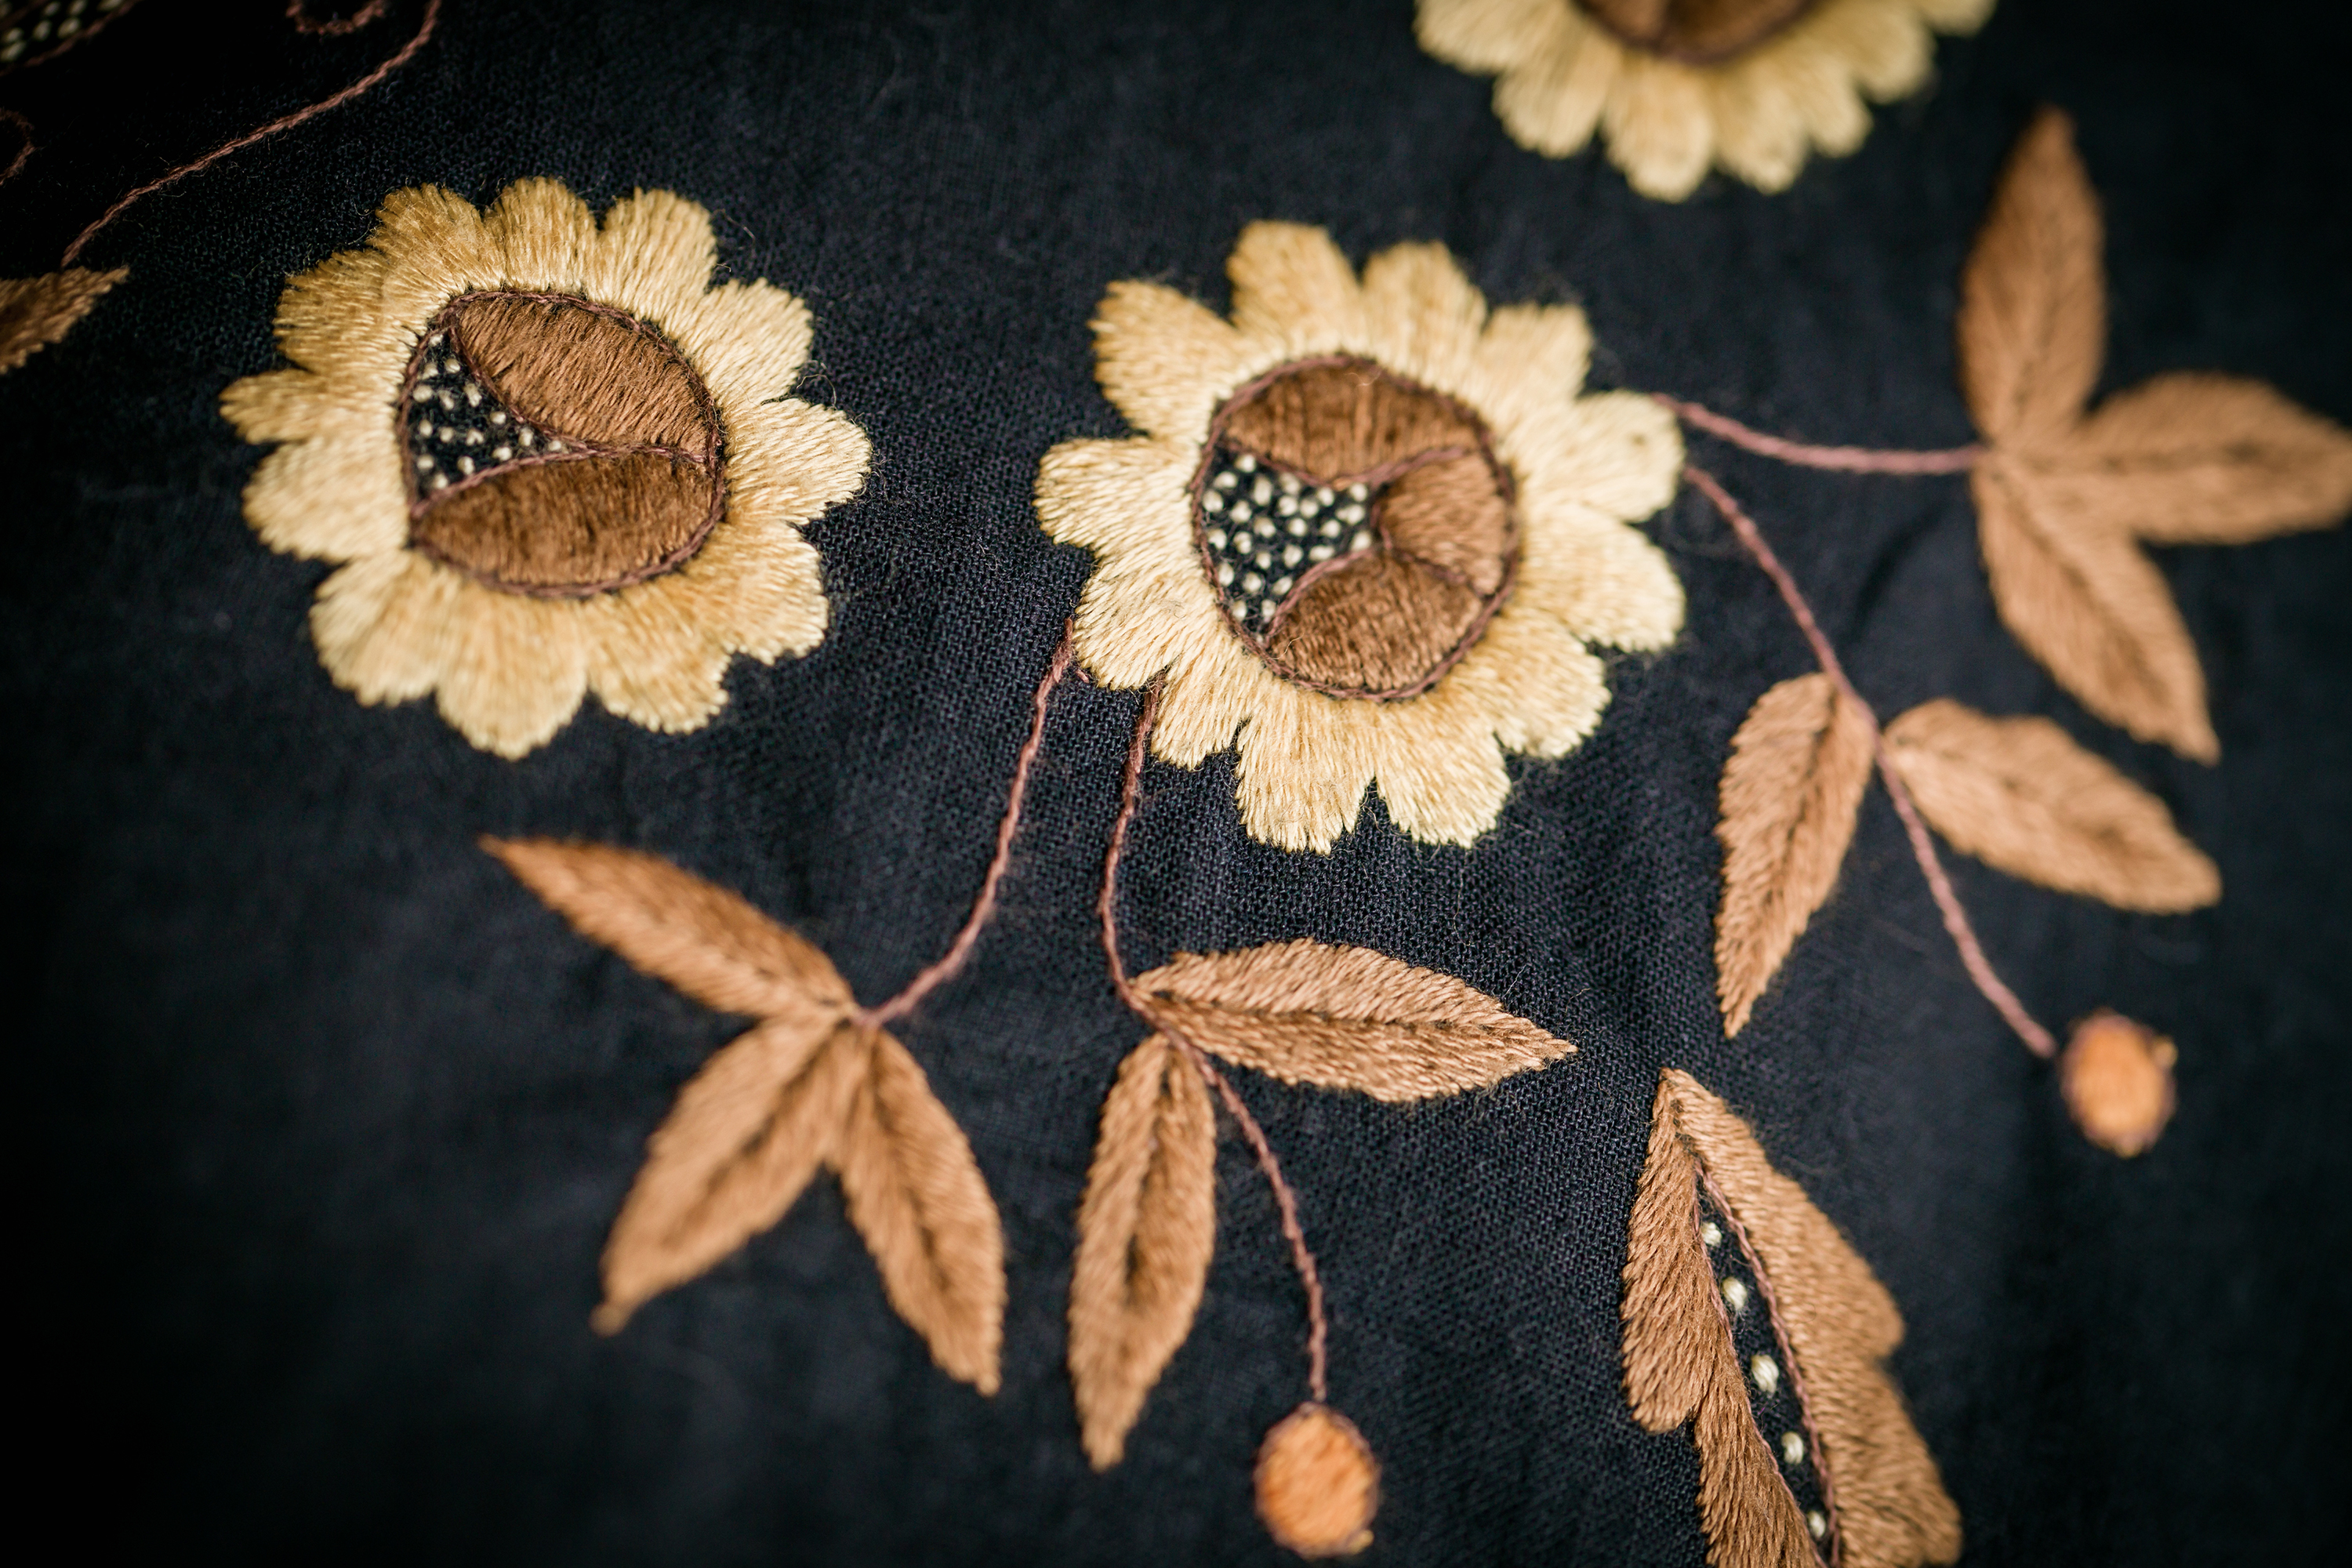 Close-up on the Kashubian embroidery.